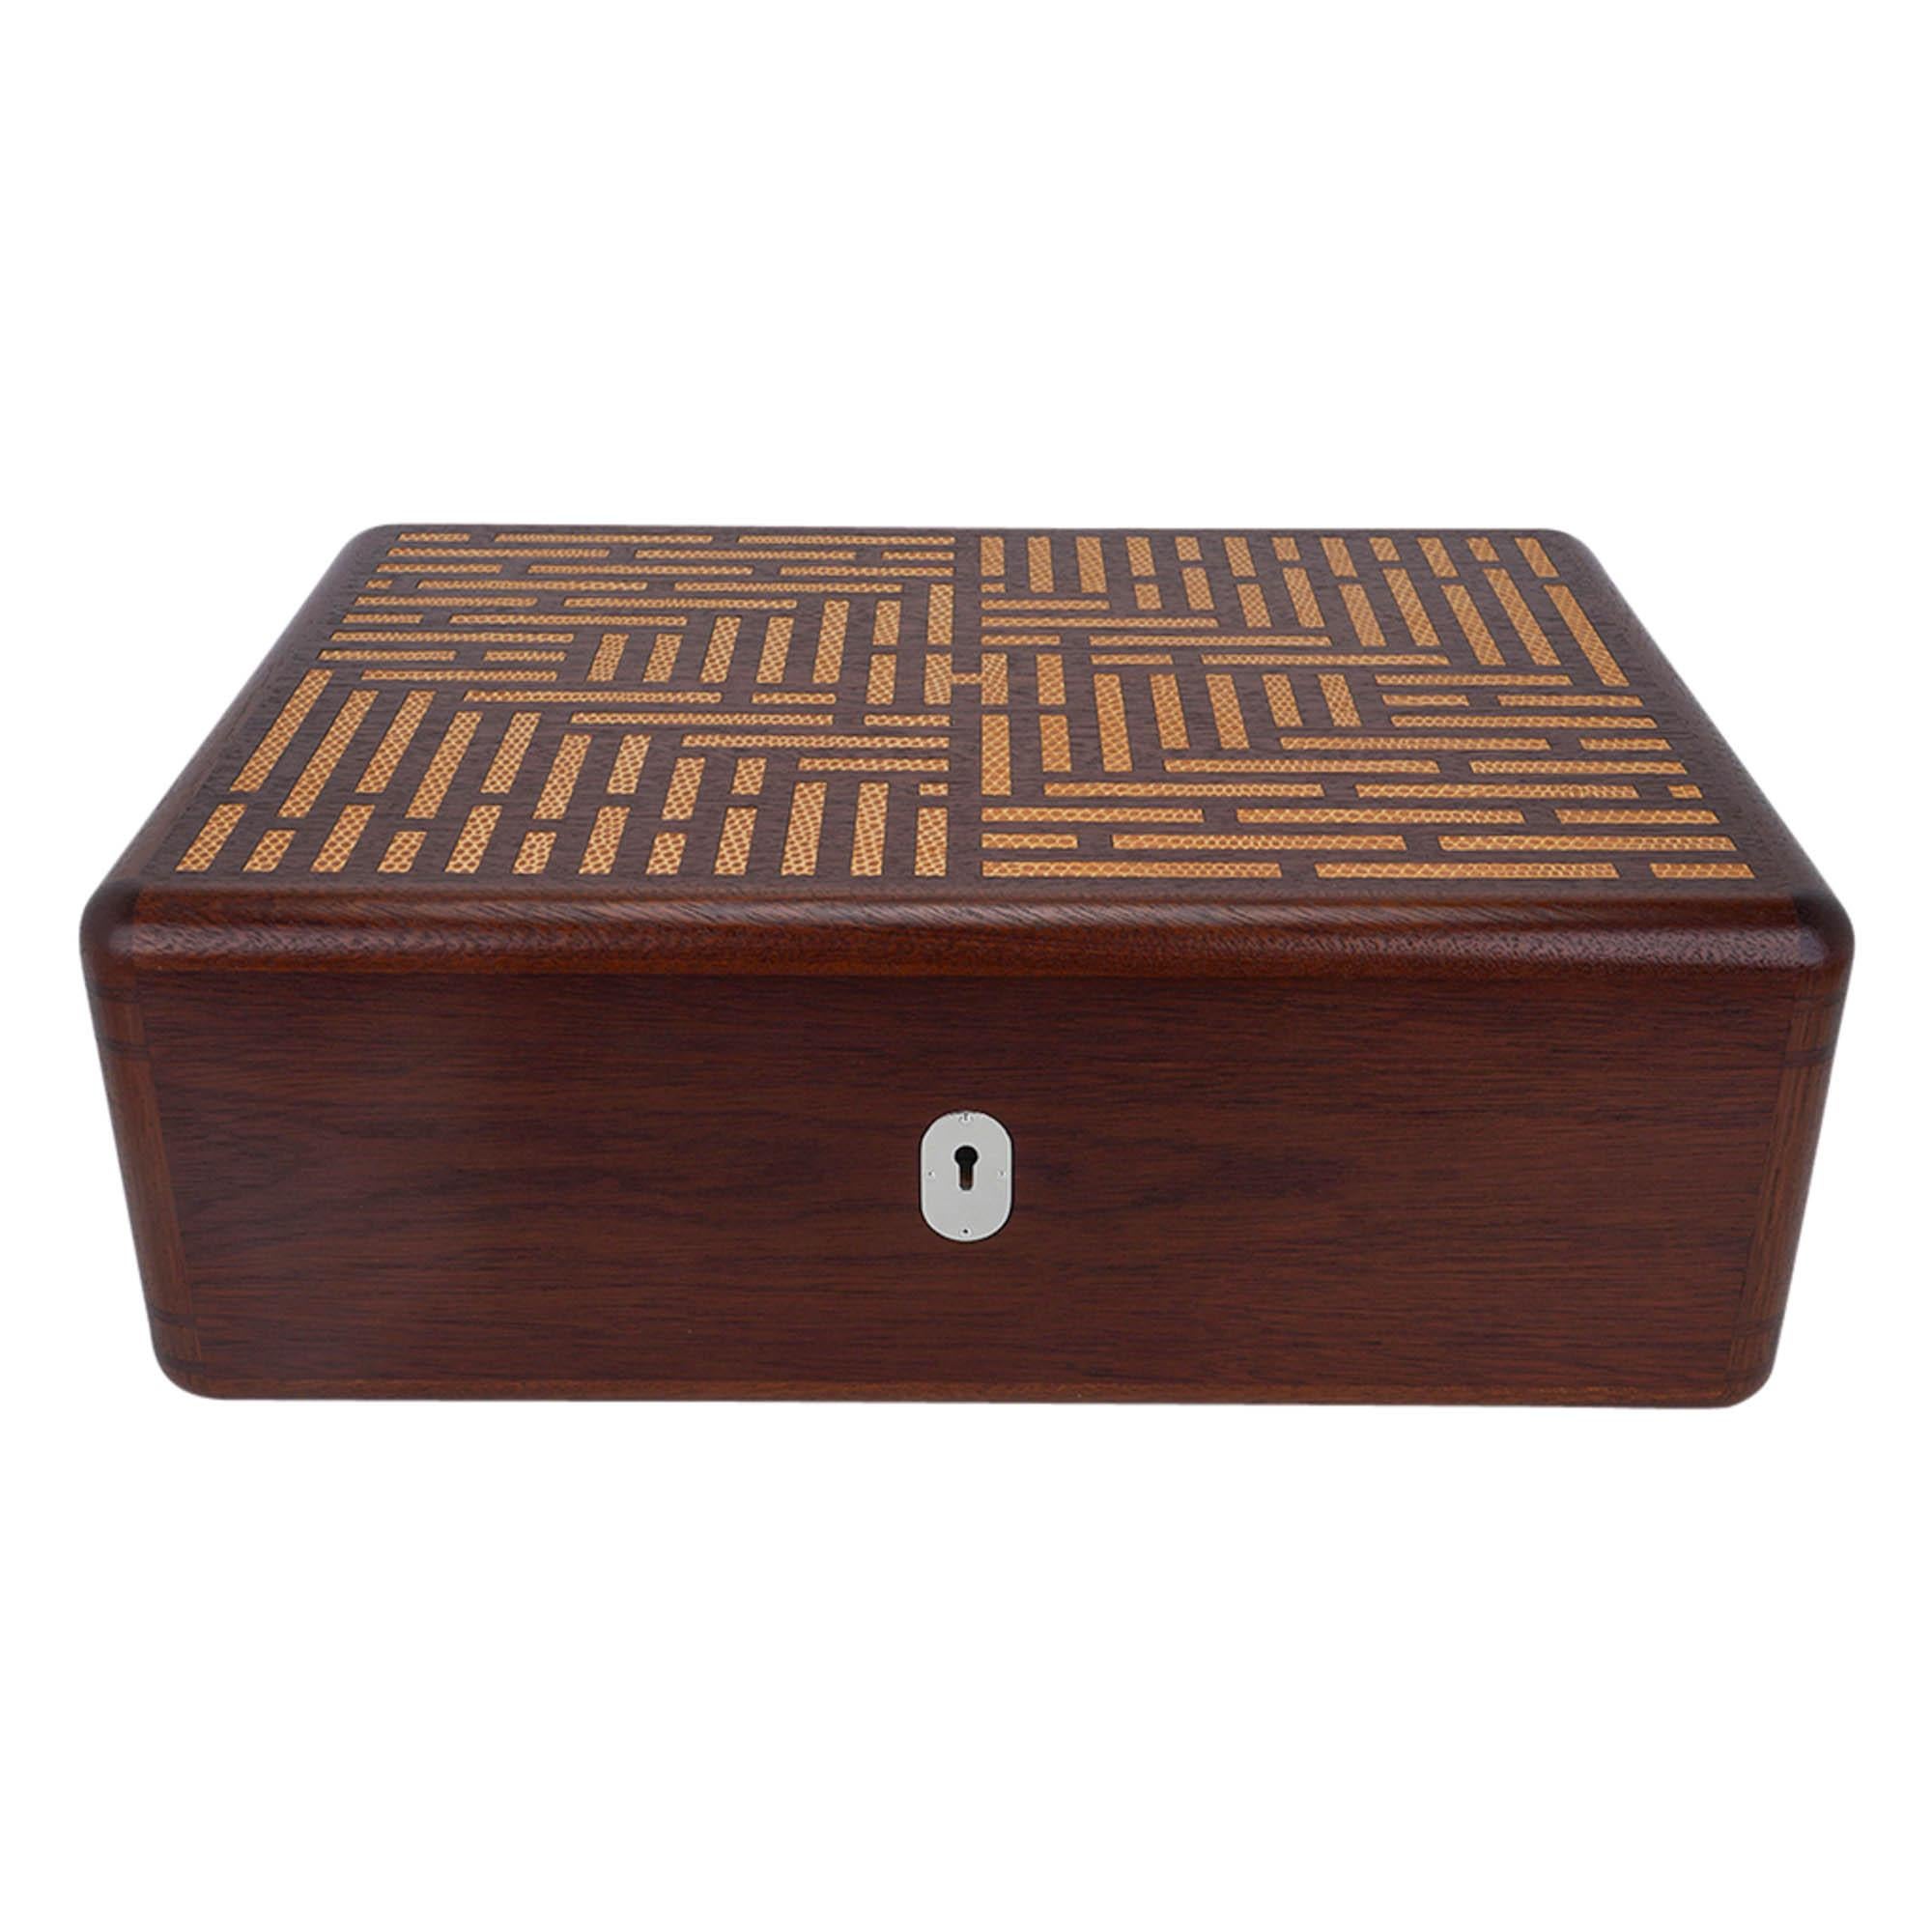 Hermes Coffret a Cigares Humidor Limited Edition Sycamore Holz Sesam Eidechse im Angebot 8